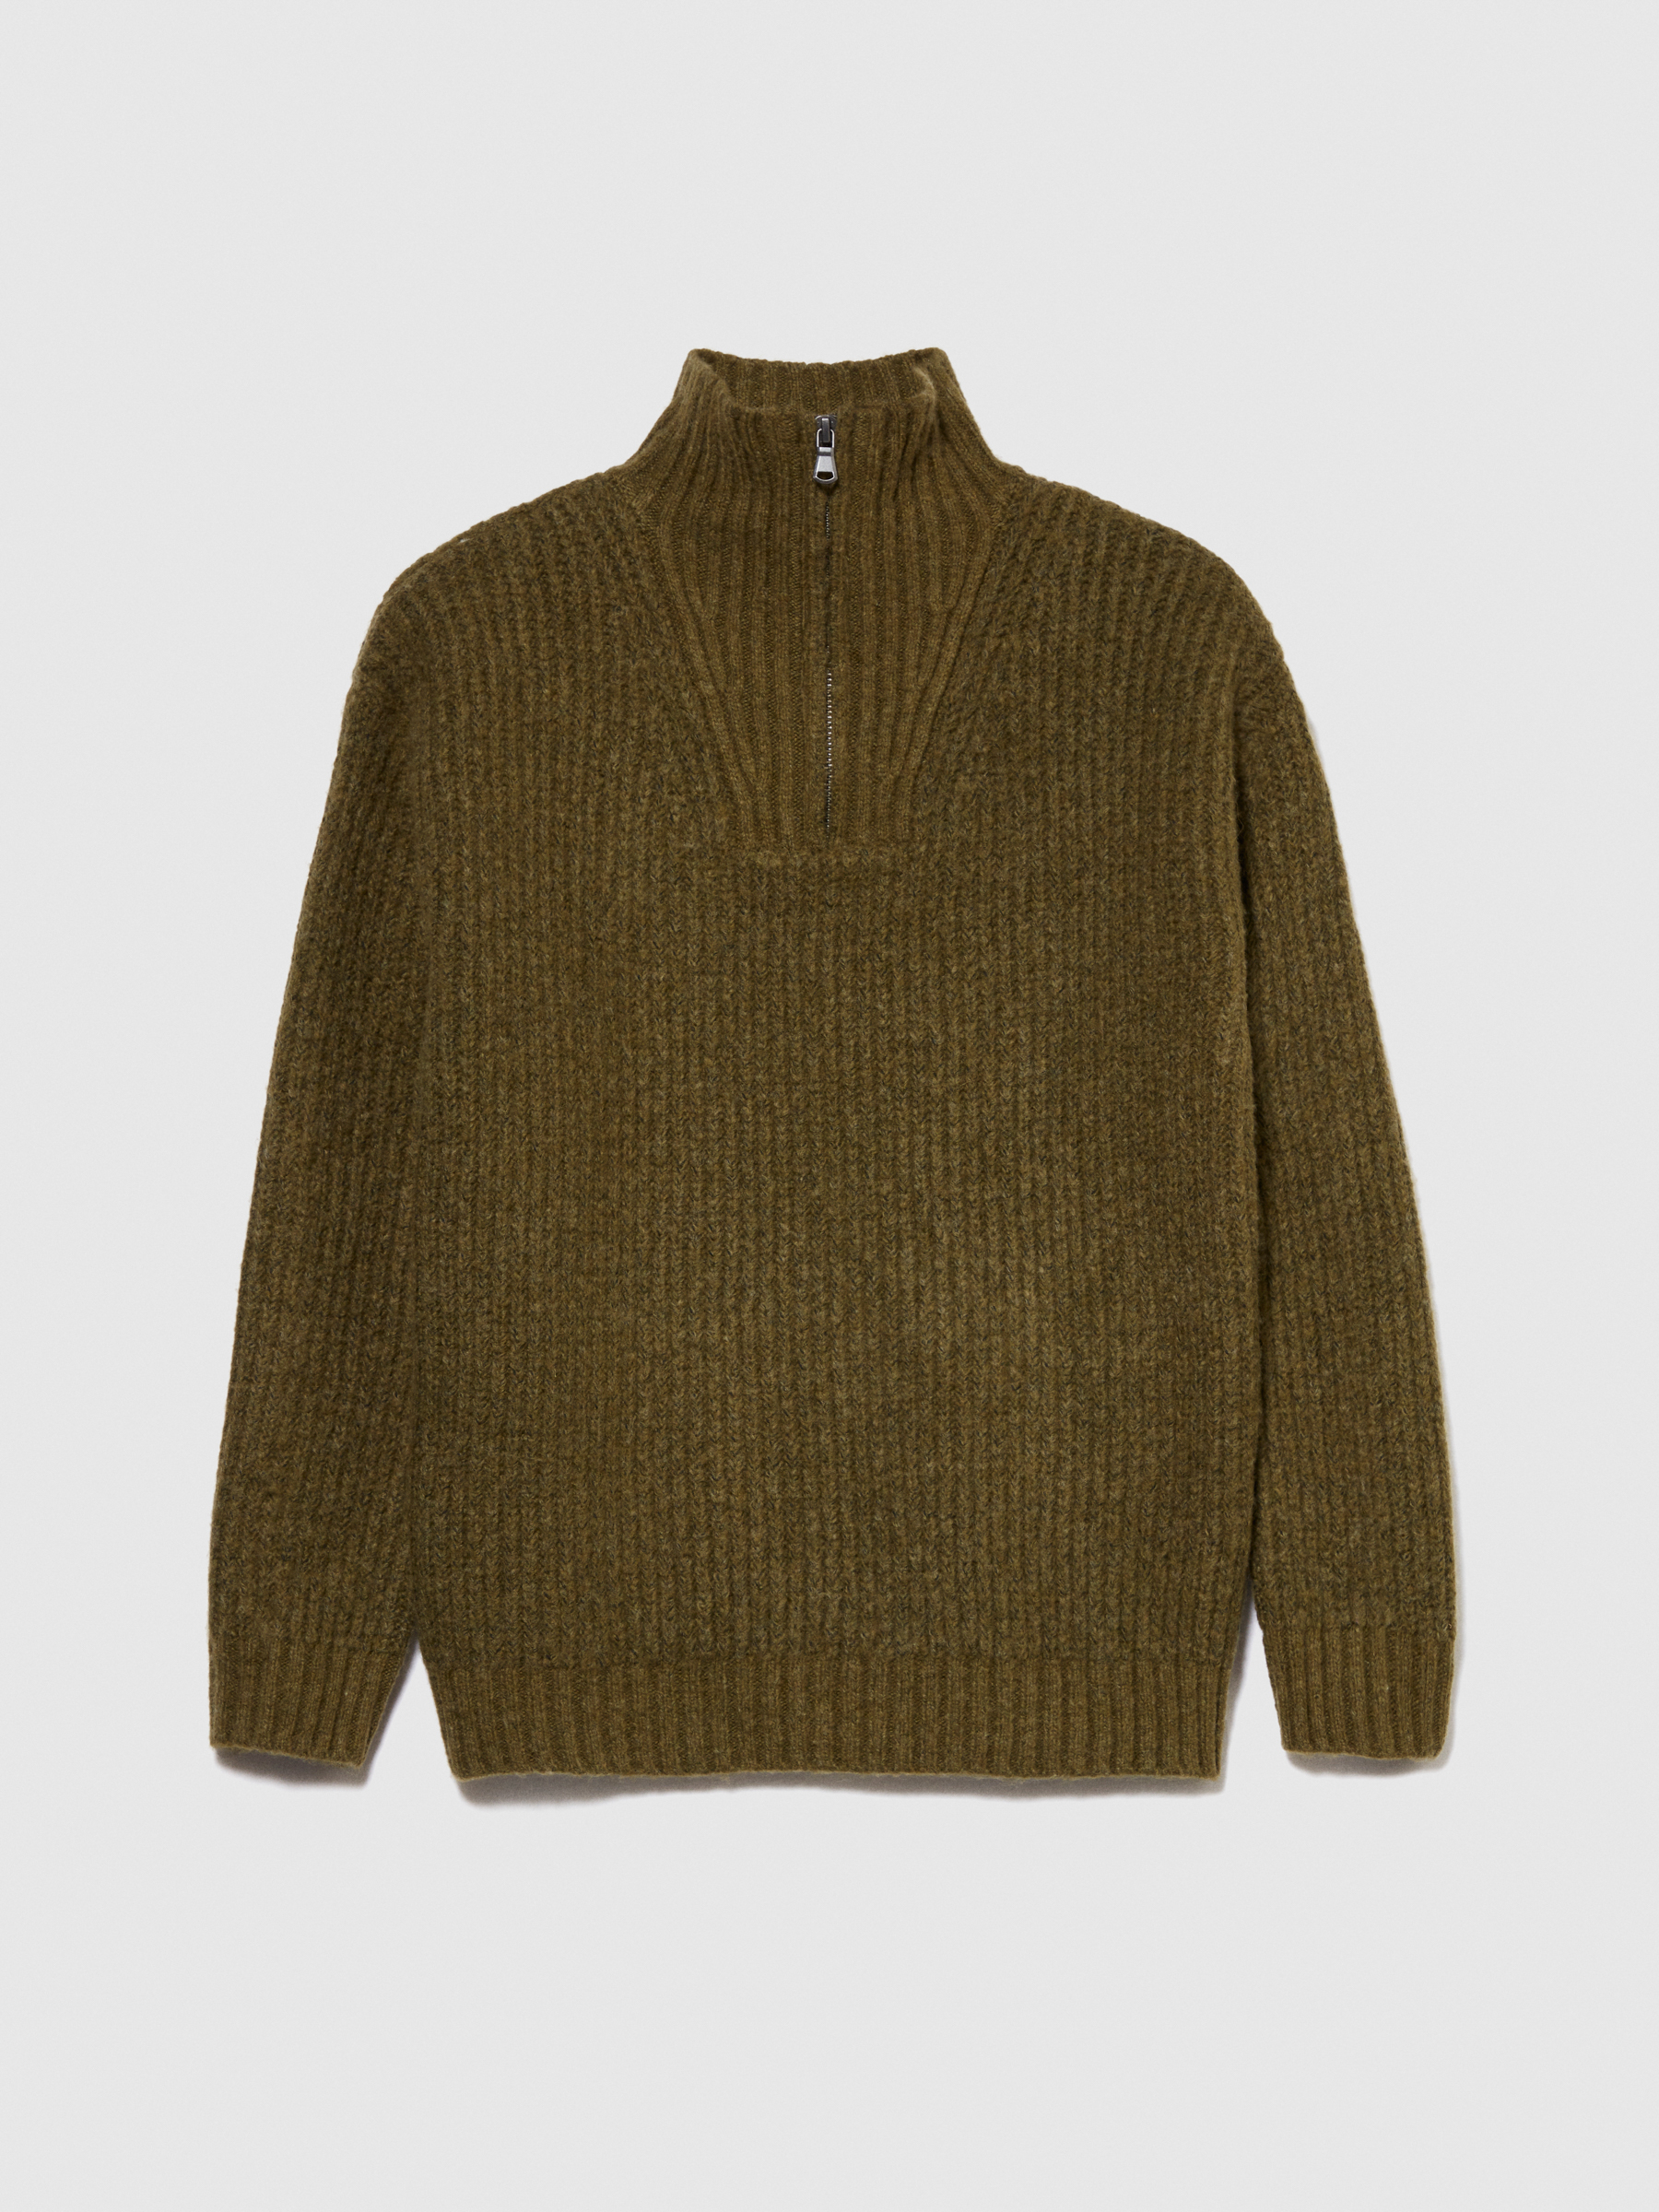 Sisley Young - Sweater With High Neck, Man, Military Green, Size: KL